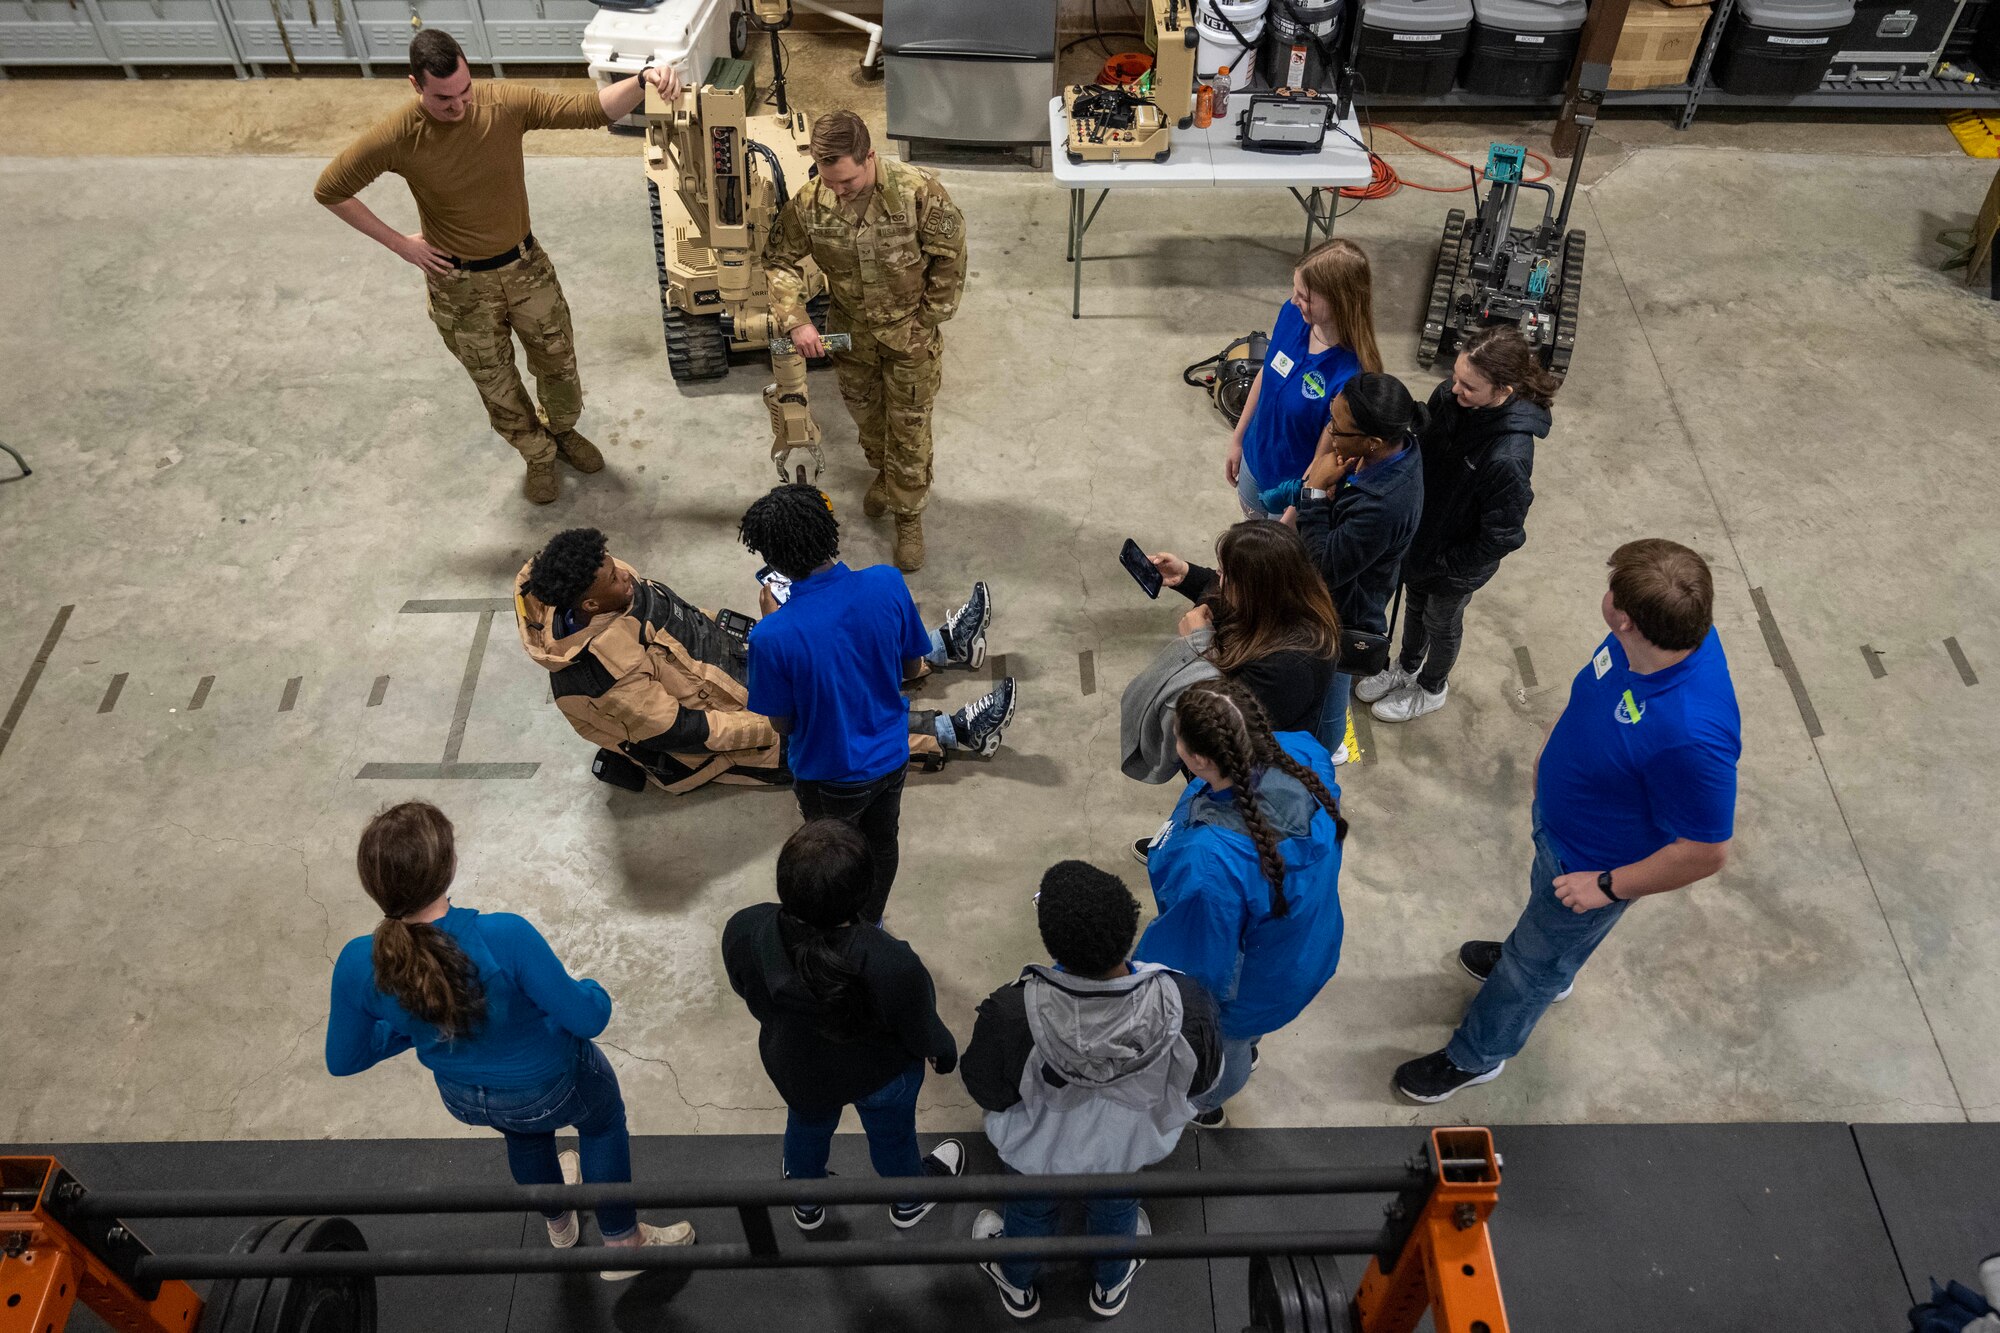 A student wearing a bomb suit tries to stand while other students look on.